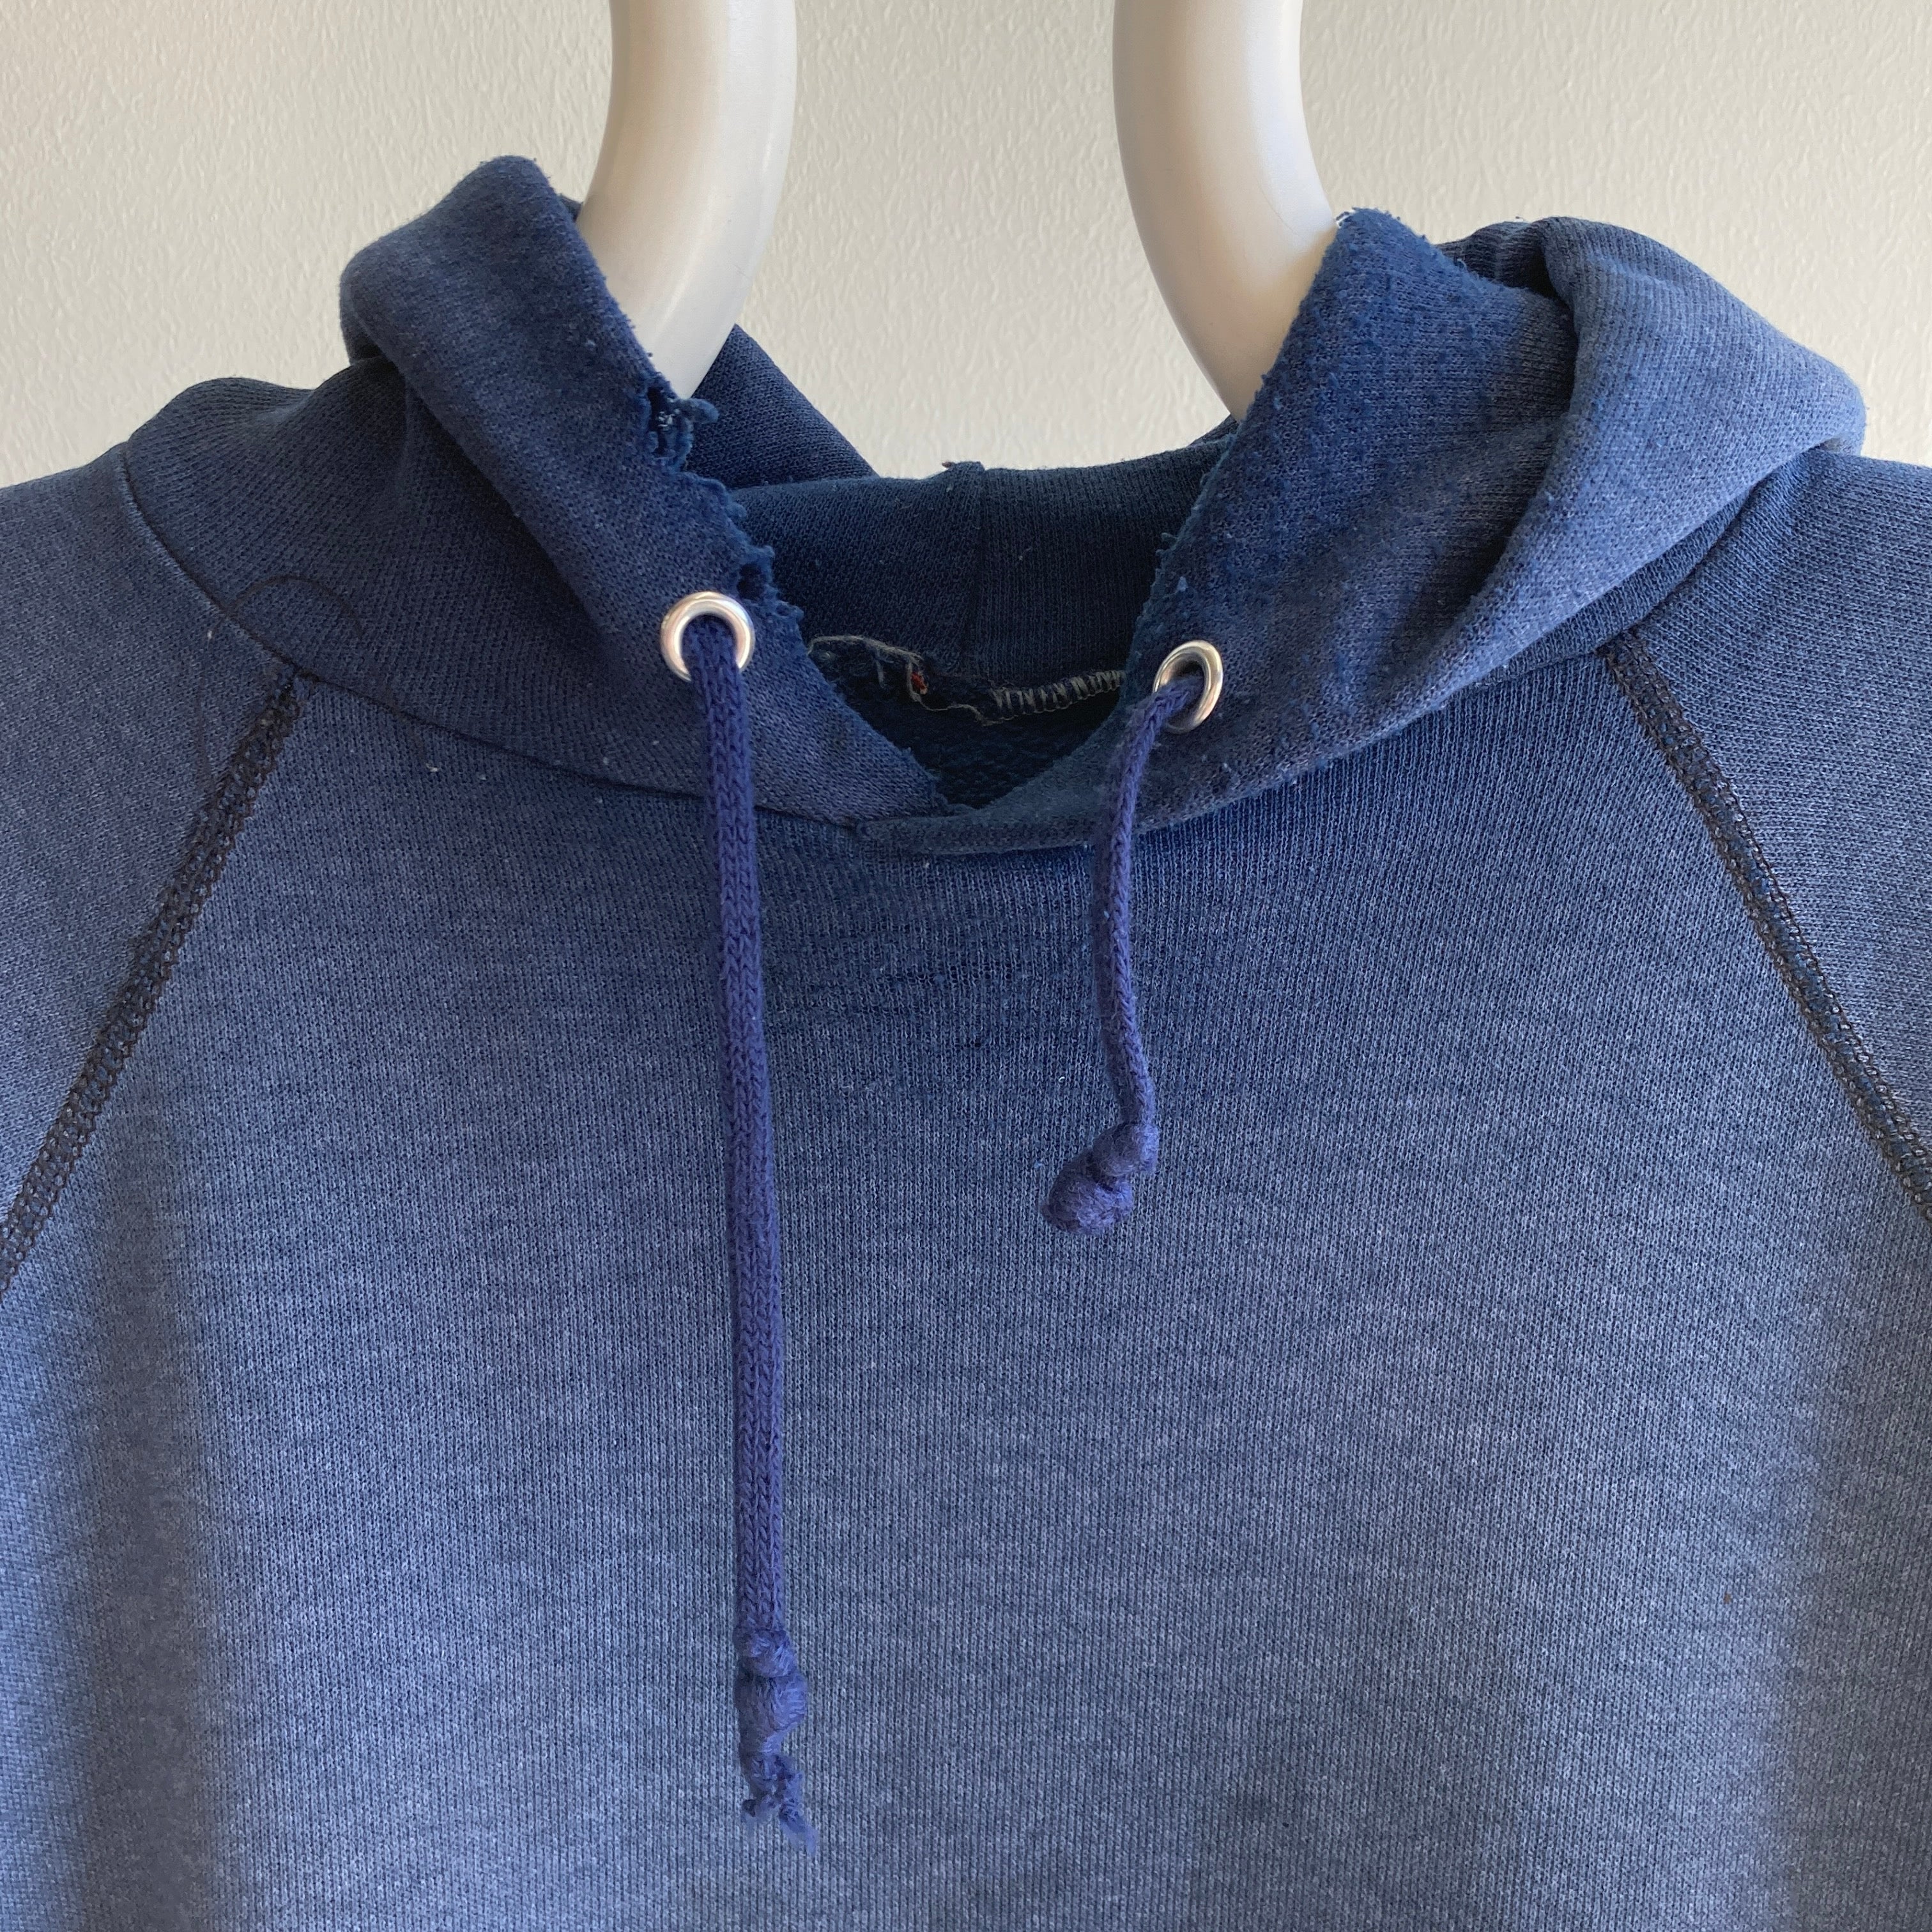 1980s Double Arm Gusset Super Beat Up Rad Fade Pull Over Hoodie